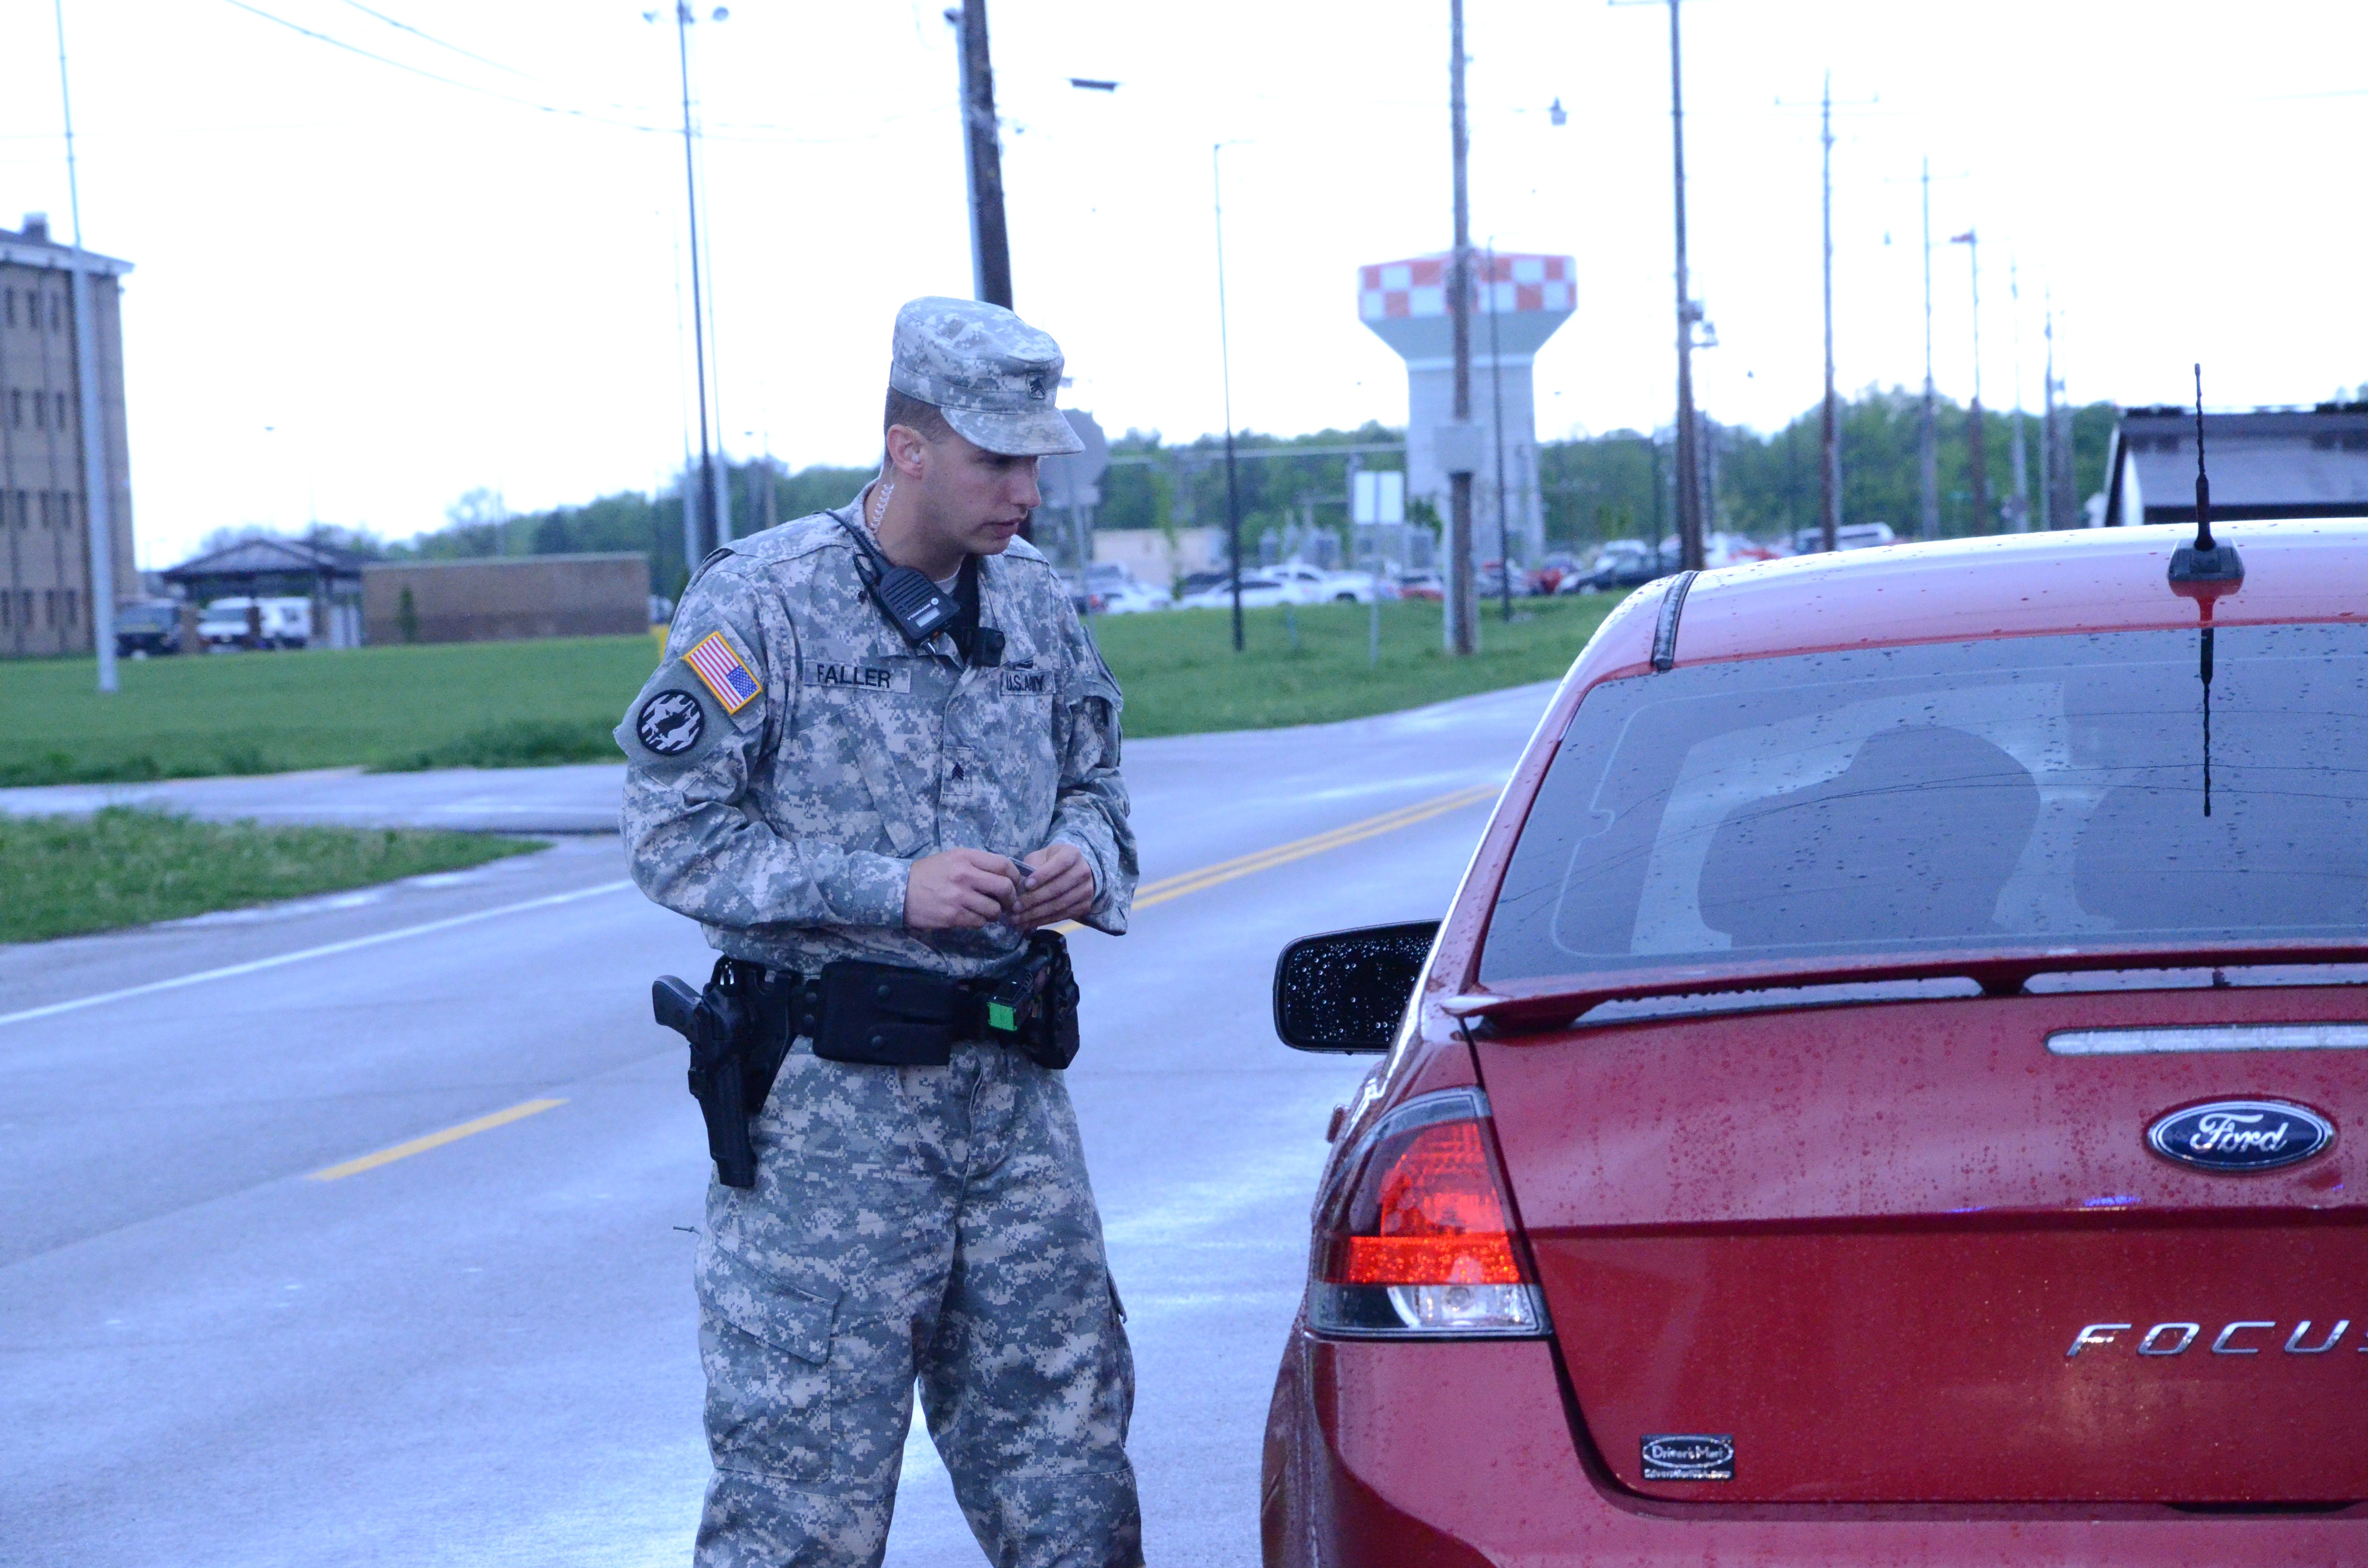 A Traffic Mps Mission To Serve And Protect Article The United States Army